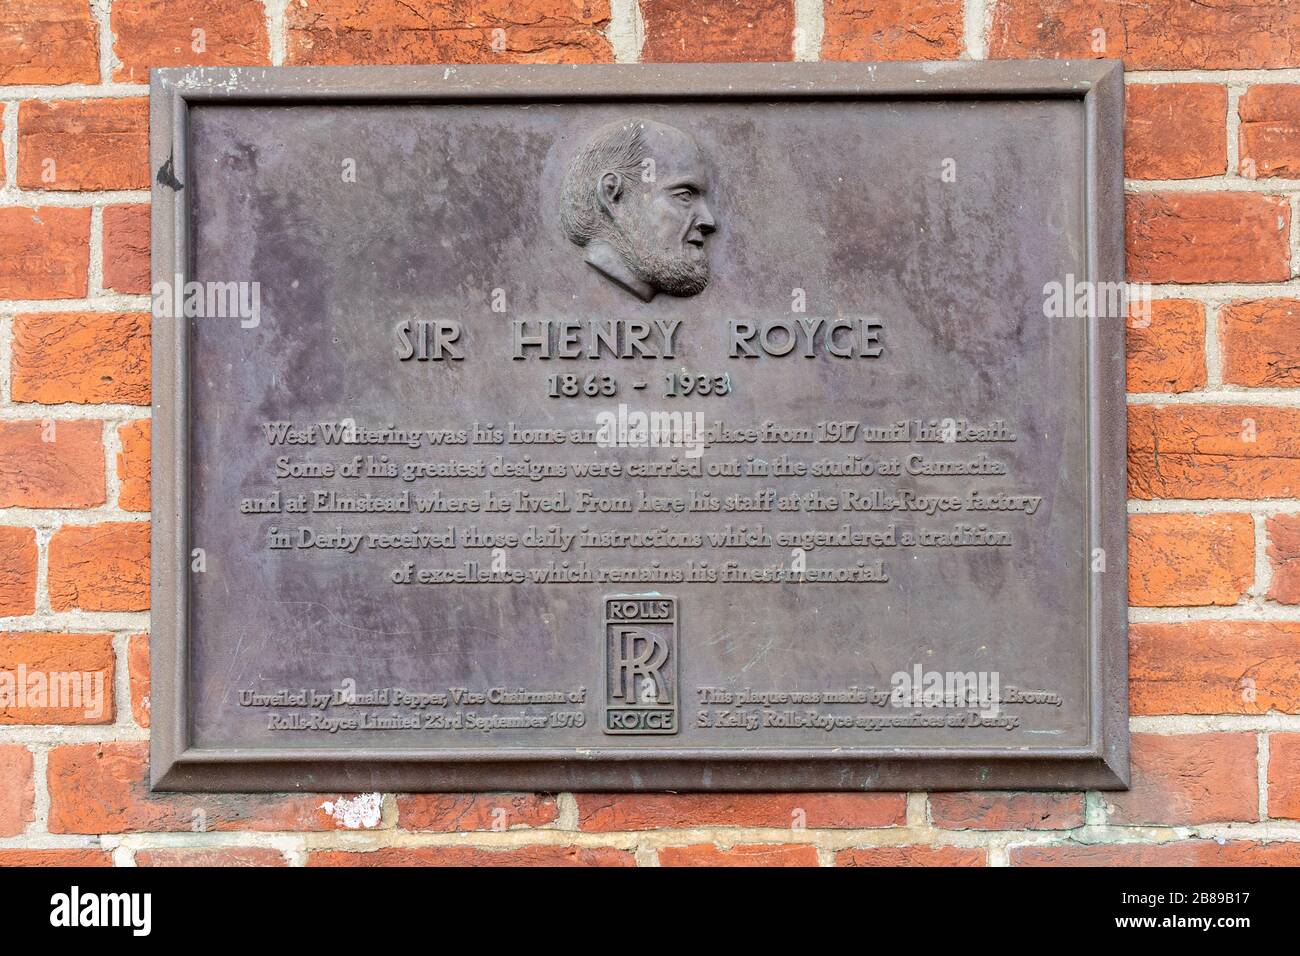 Plaque to Sir Henry Royce, English engineer and co-founder of Rolls-Royce car company, in West Wittering, West Sussex, UK Stock Photo